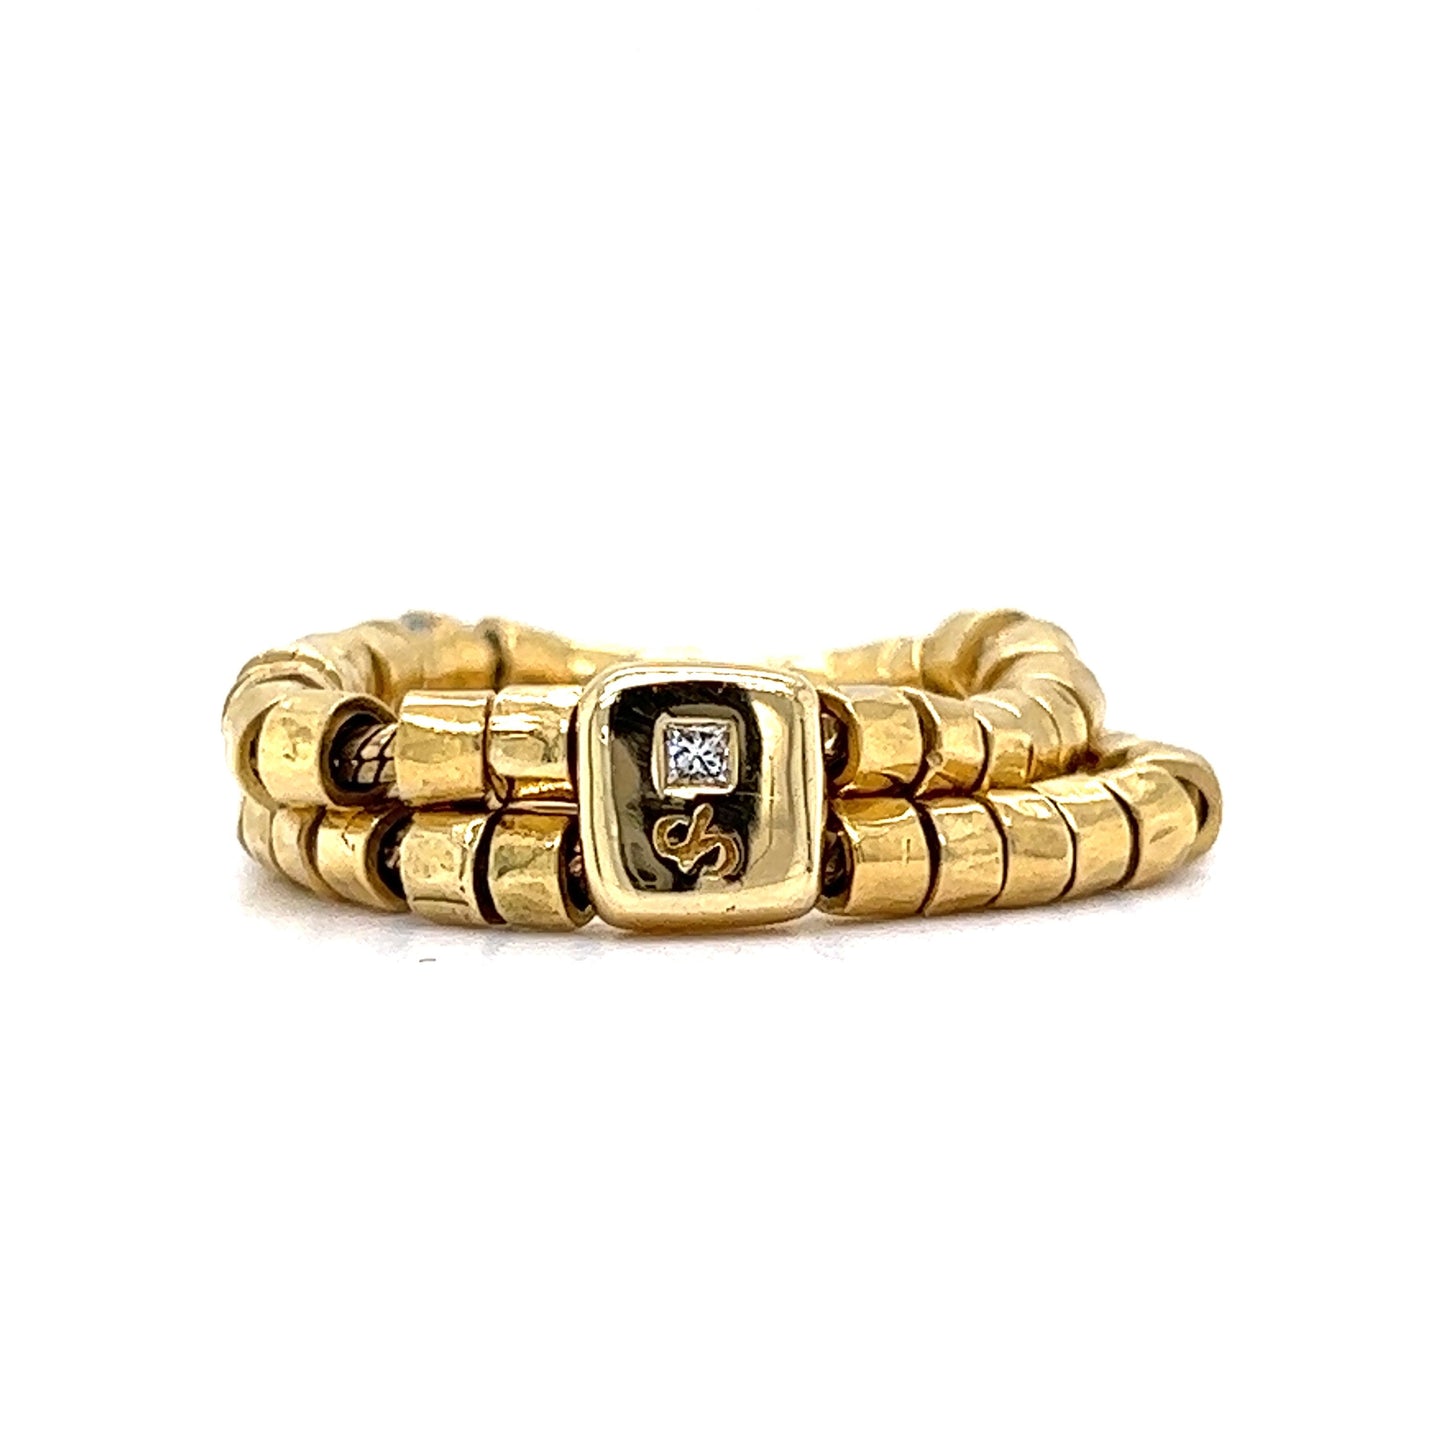 H. Stern Flexible Stacking Ring in 18k Yellow Gold